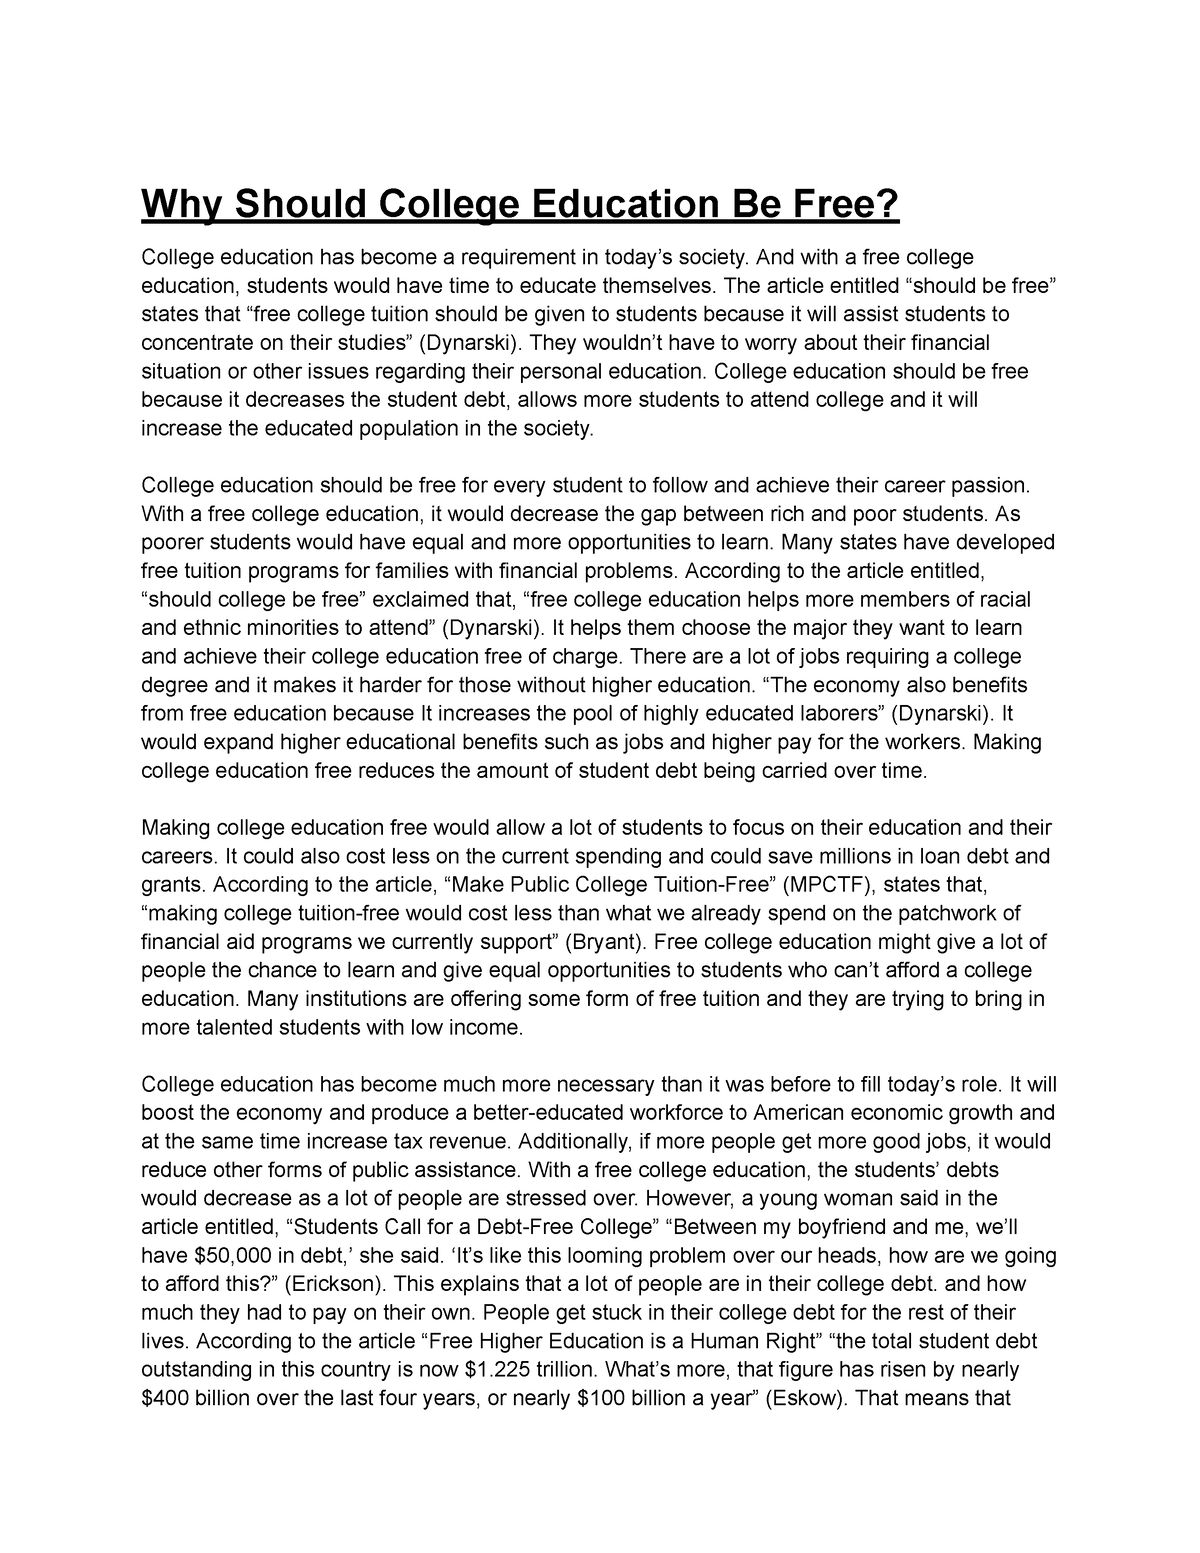 college should be free essay